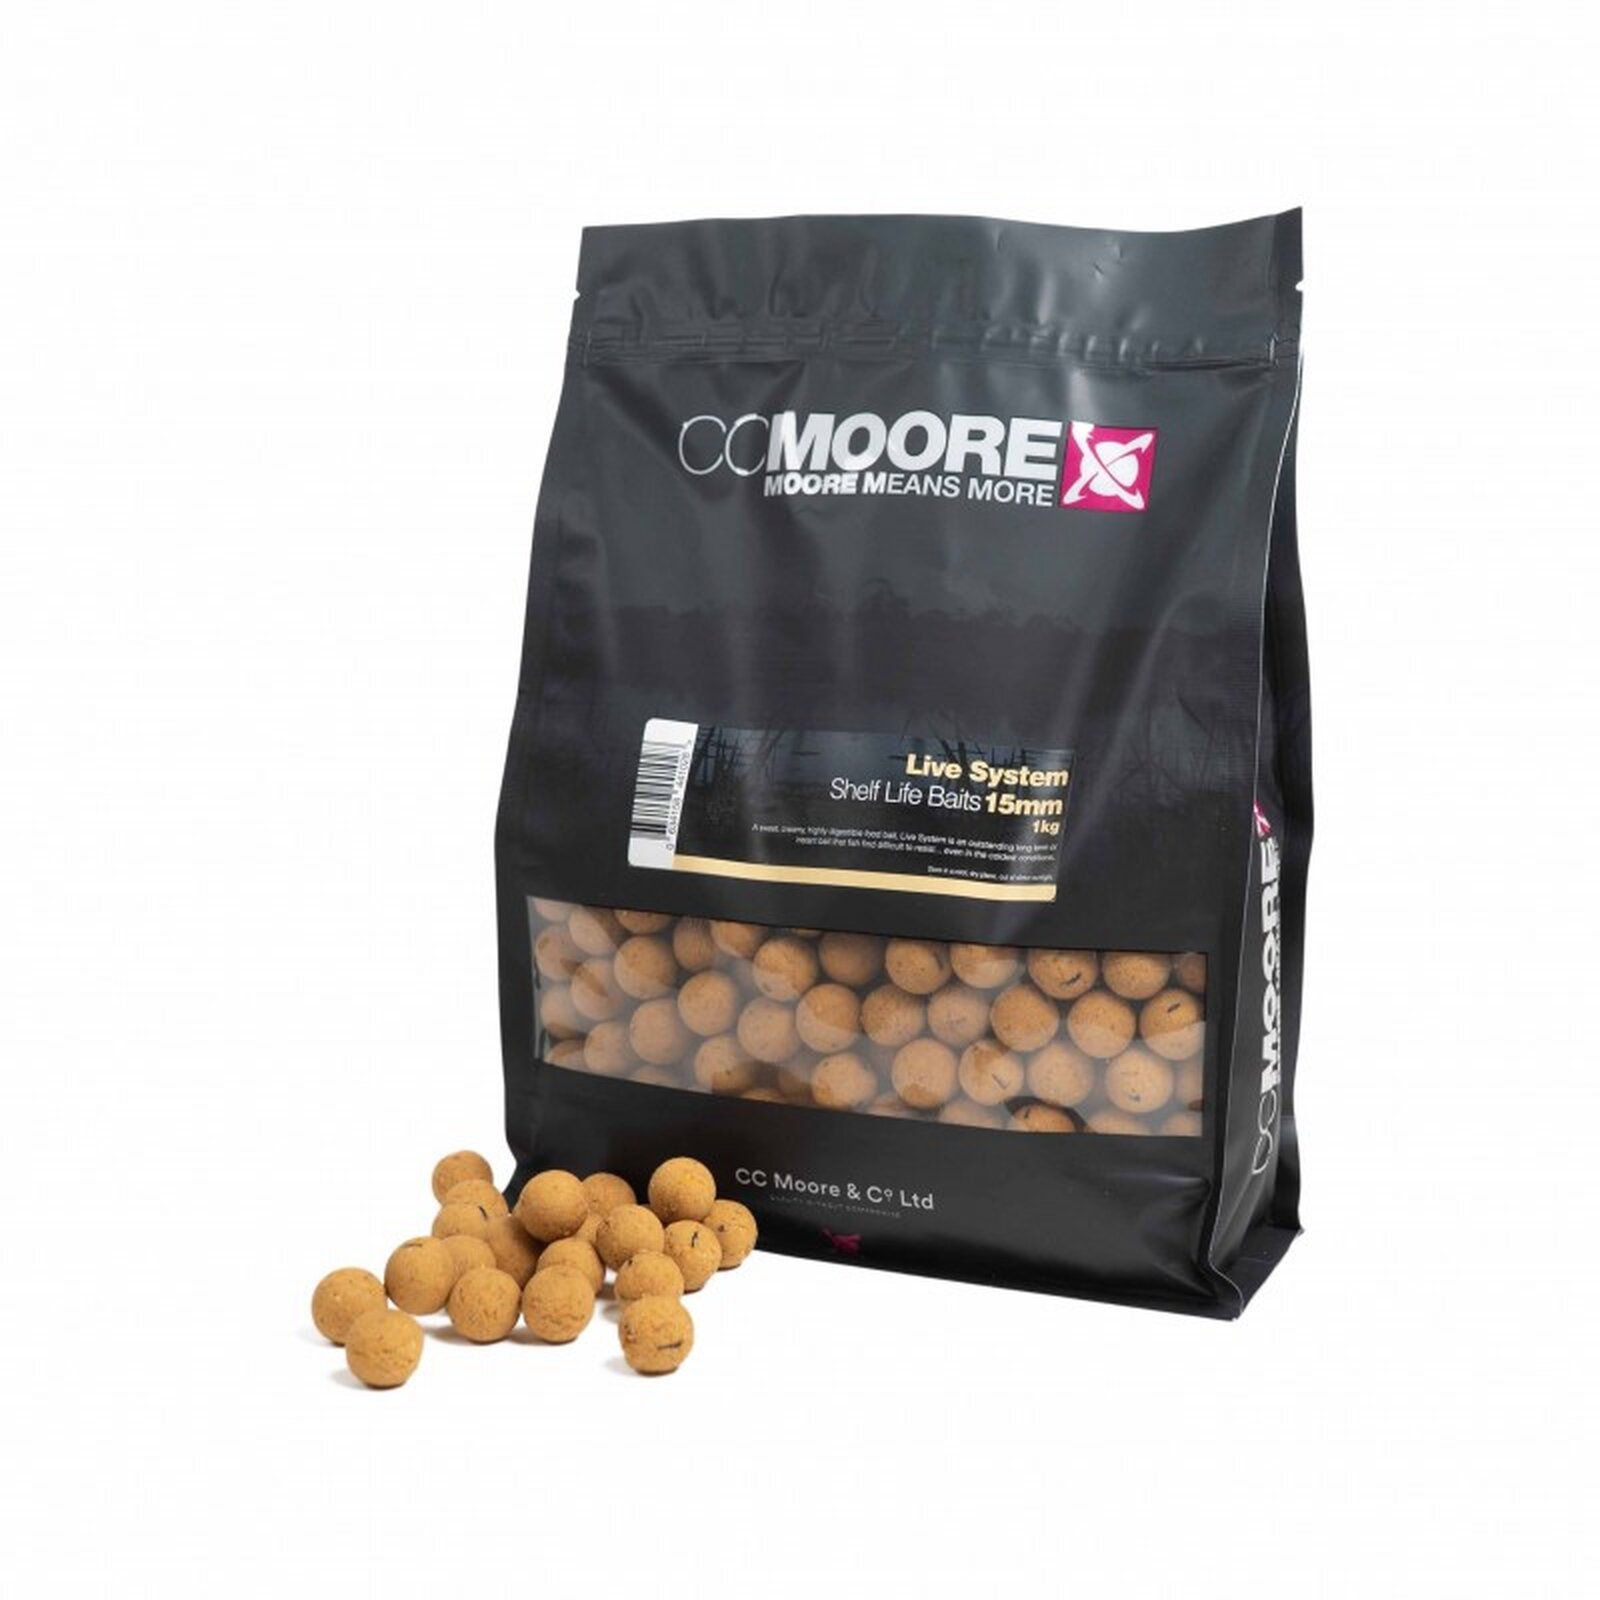 CC MOORE Live System 18mm 5Kg